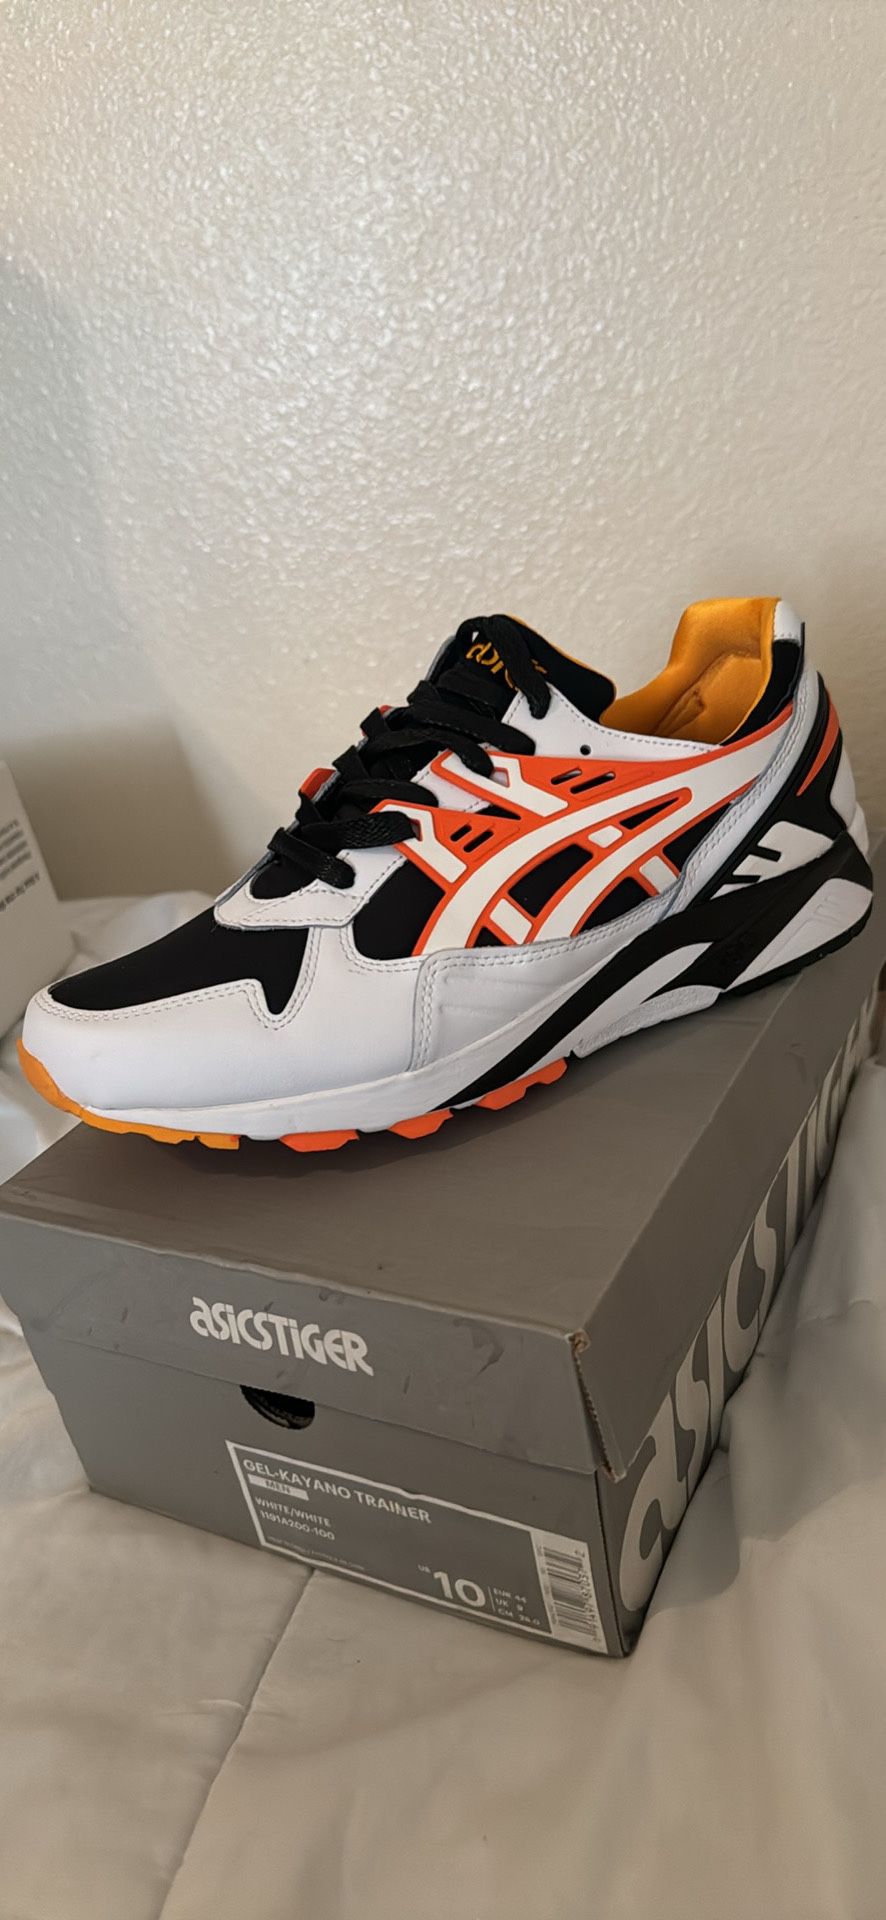 ASICS GEL- Kayano Trainer Happy Chaos Size 9.5